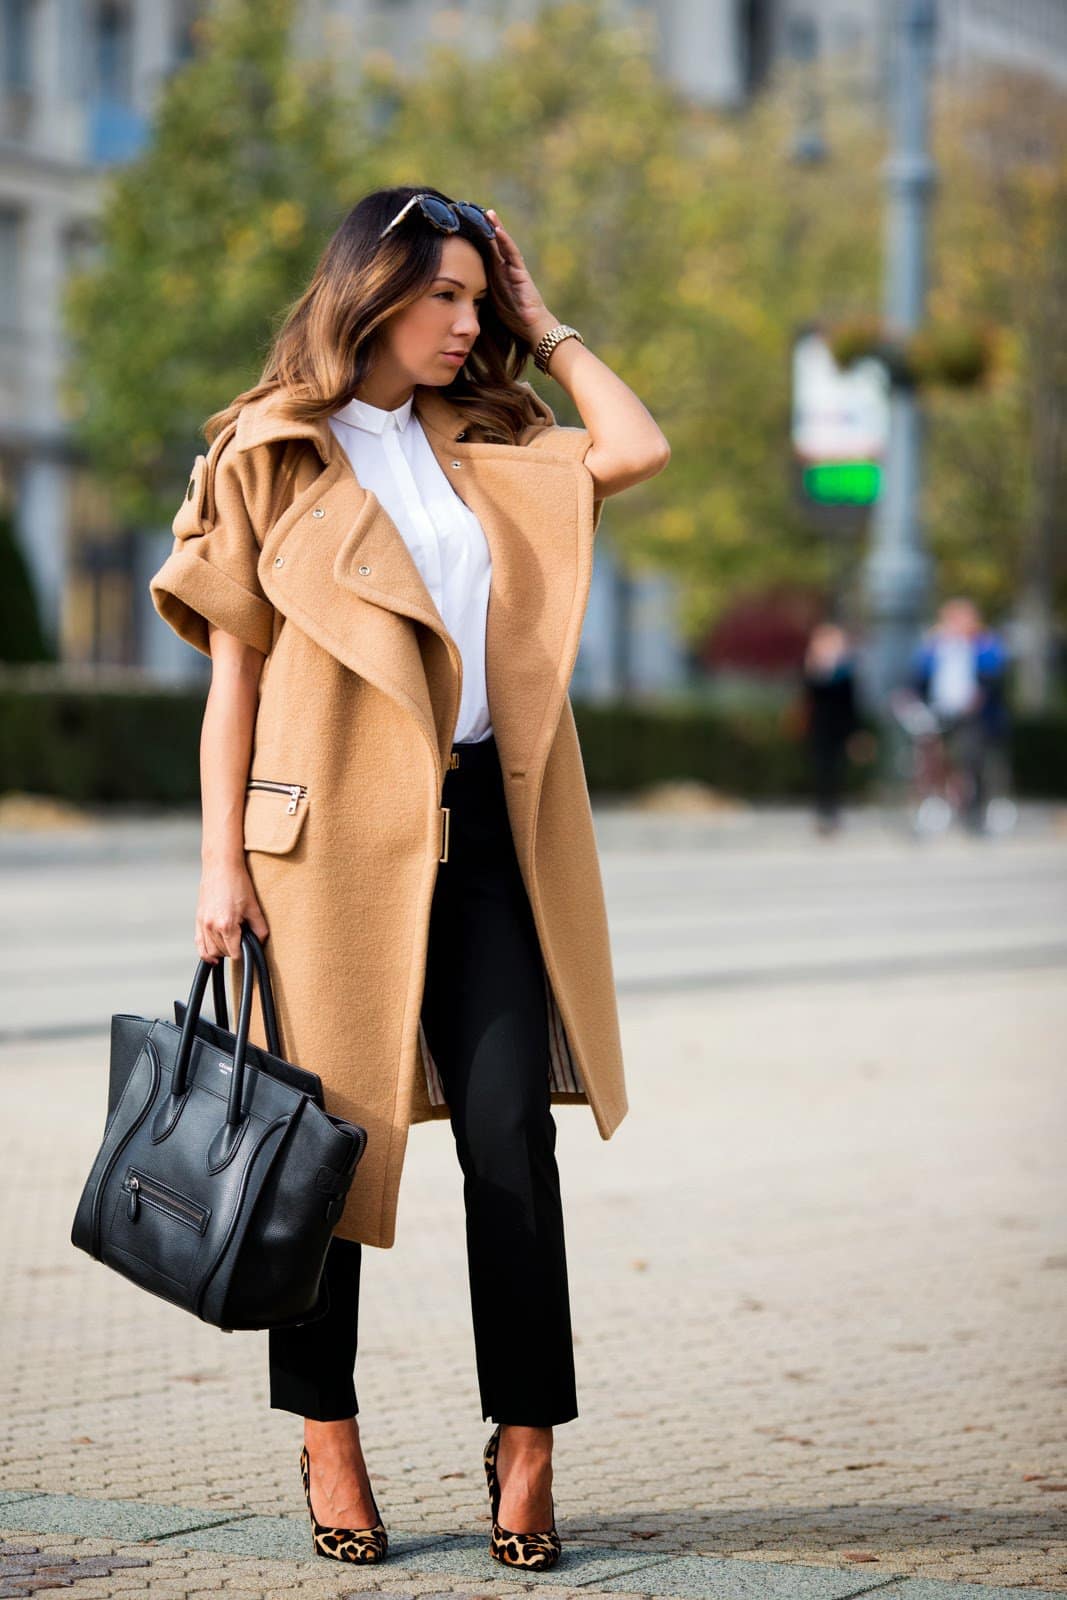 Winter Must-Haves For Stylish Looks - ALL FOR FASHION DESIGN